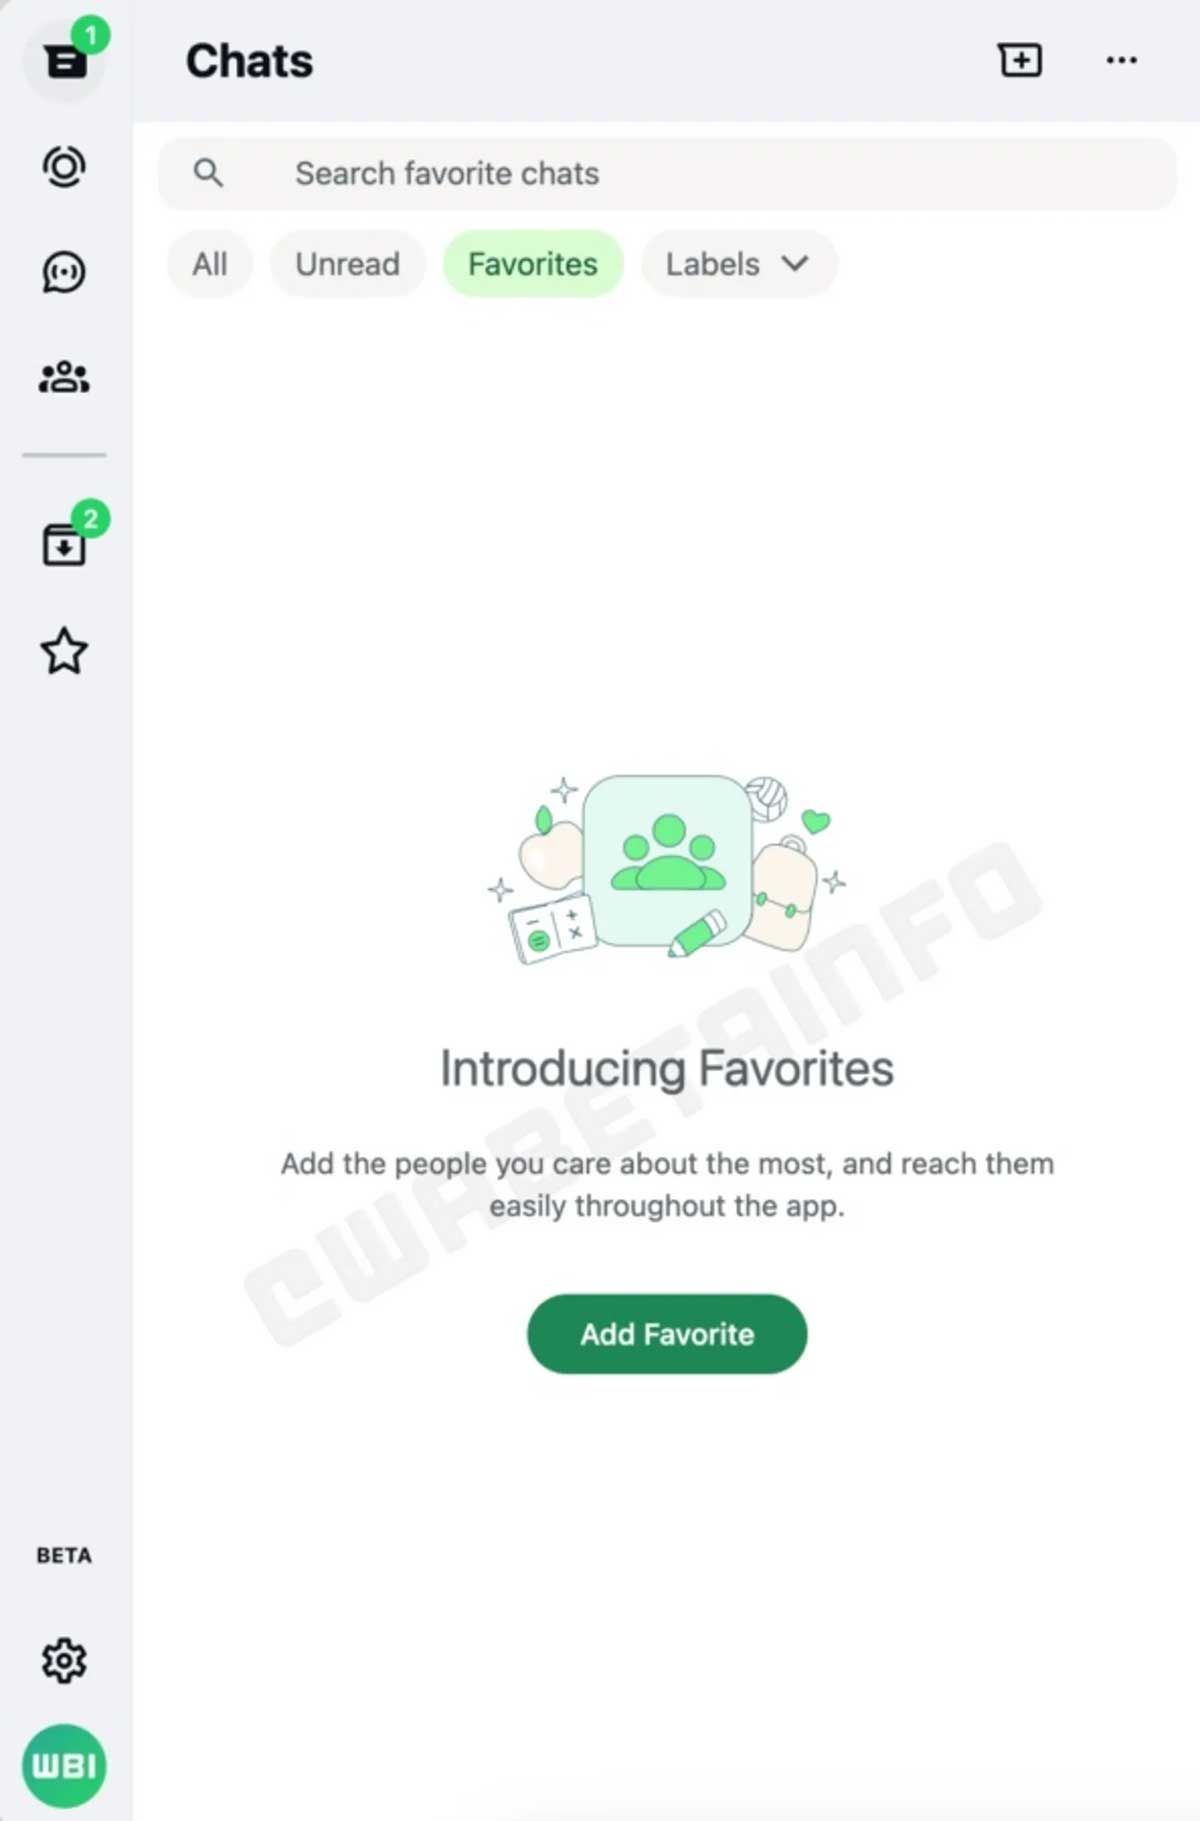 WhatsApp web version with practical features